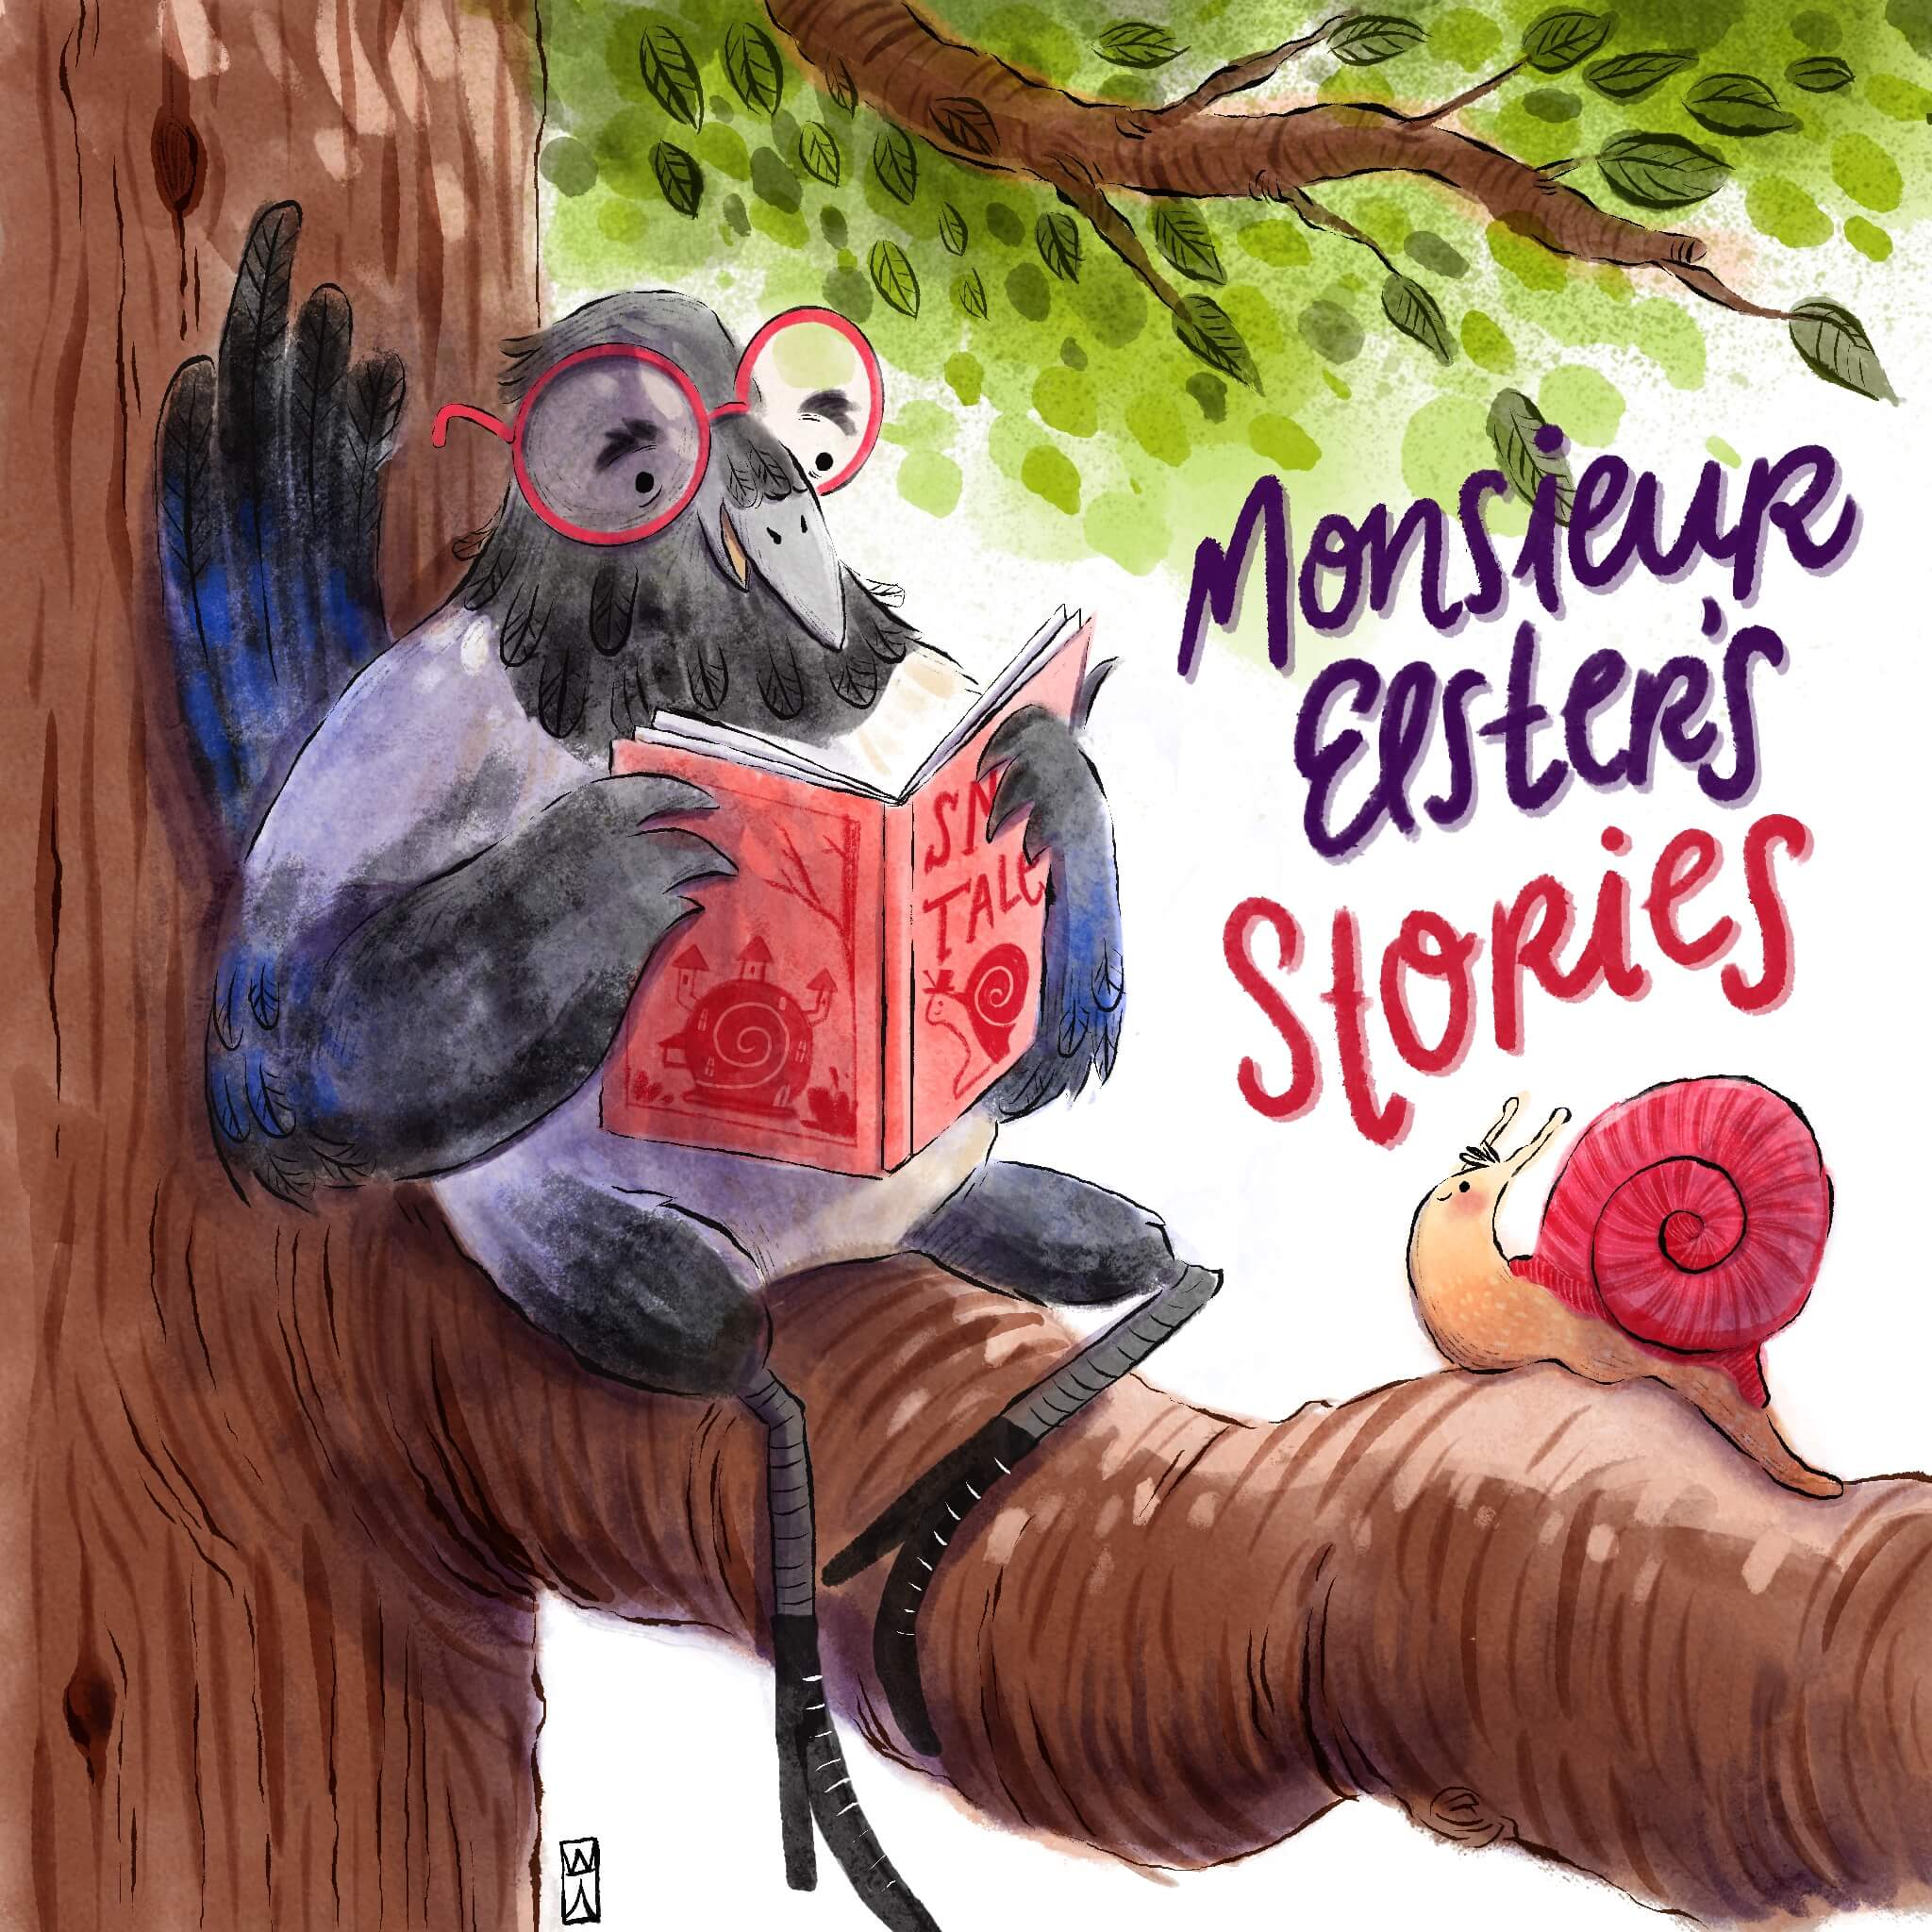 a magpie sitting on a tree and reding a book to a snail